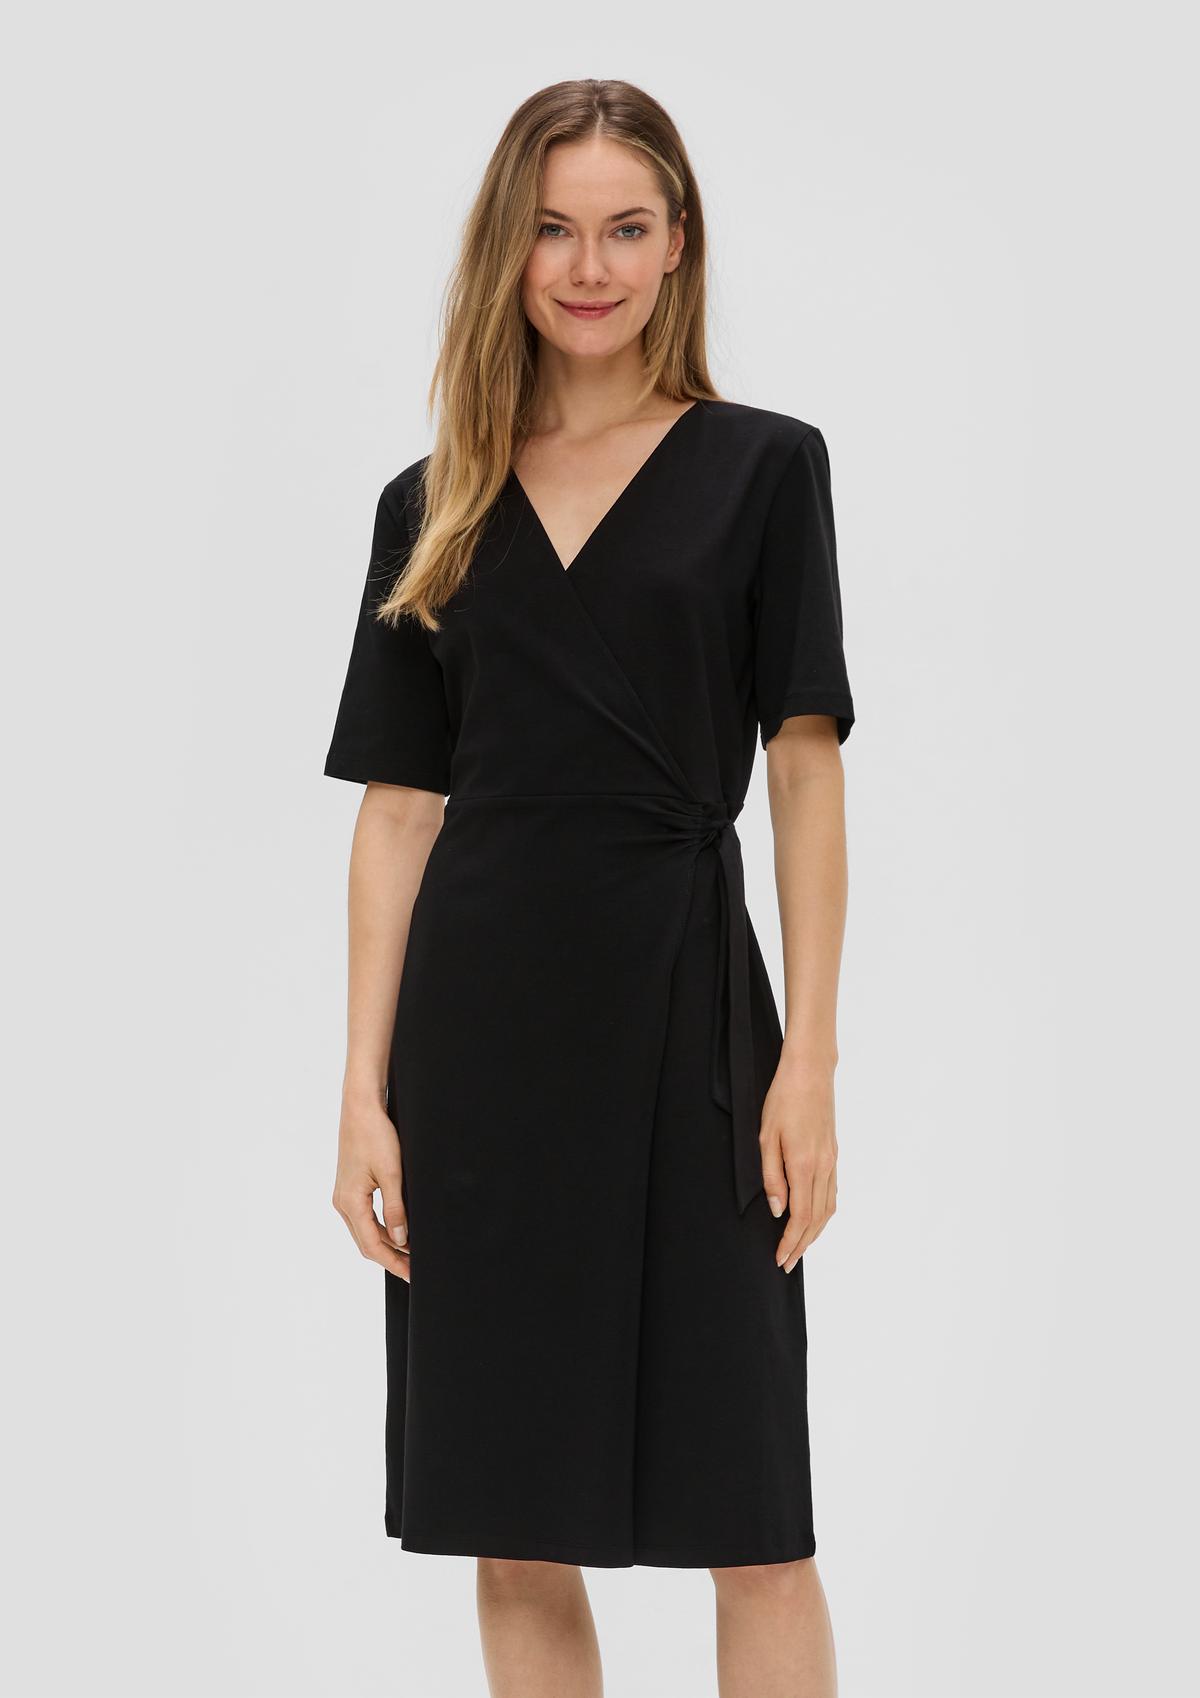 s.Oliver Jersey dress with a round neckline and knotted detail